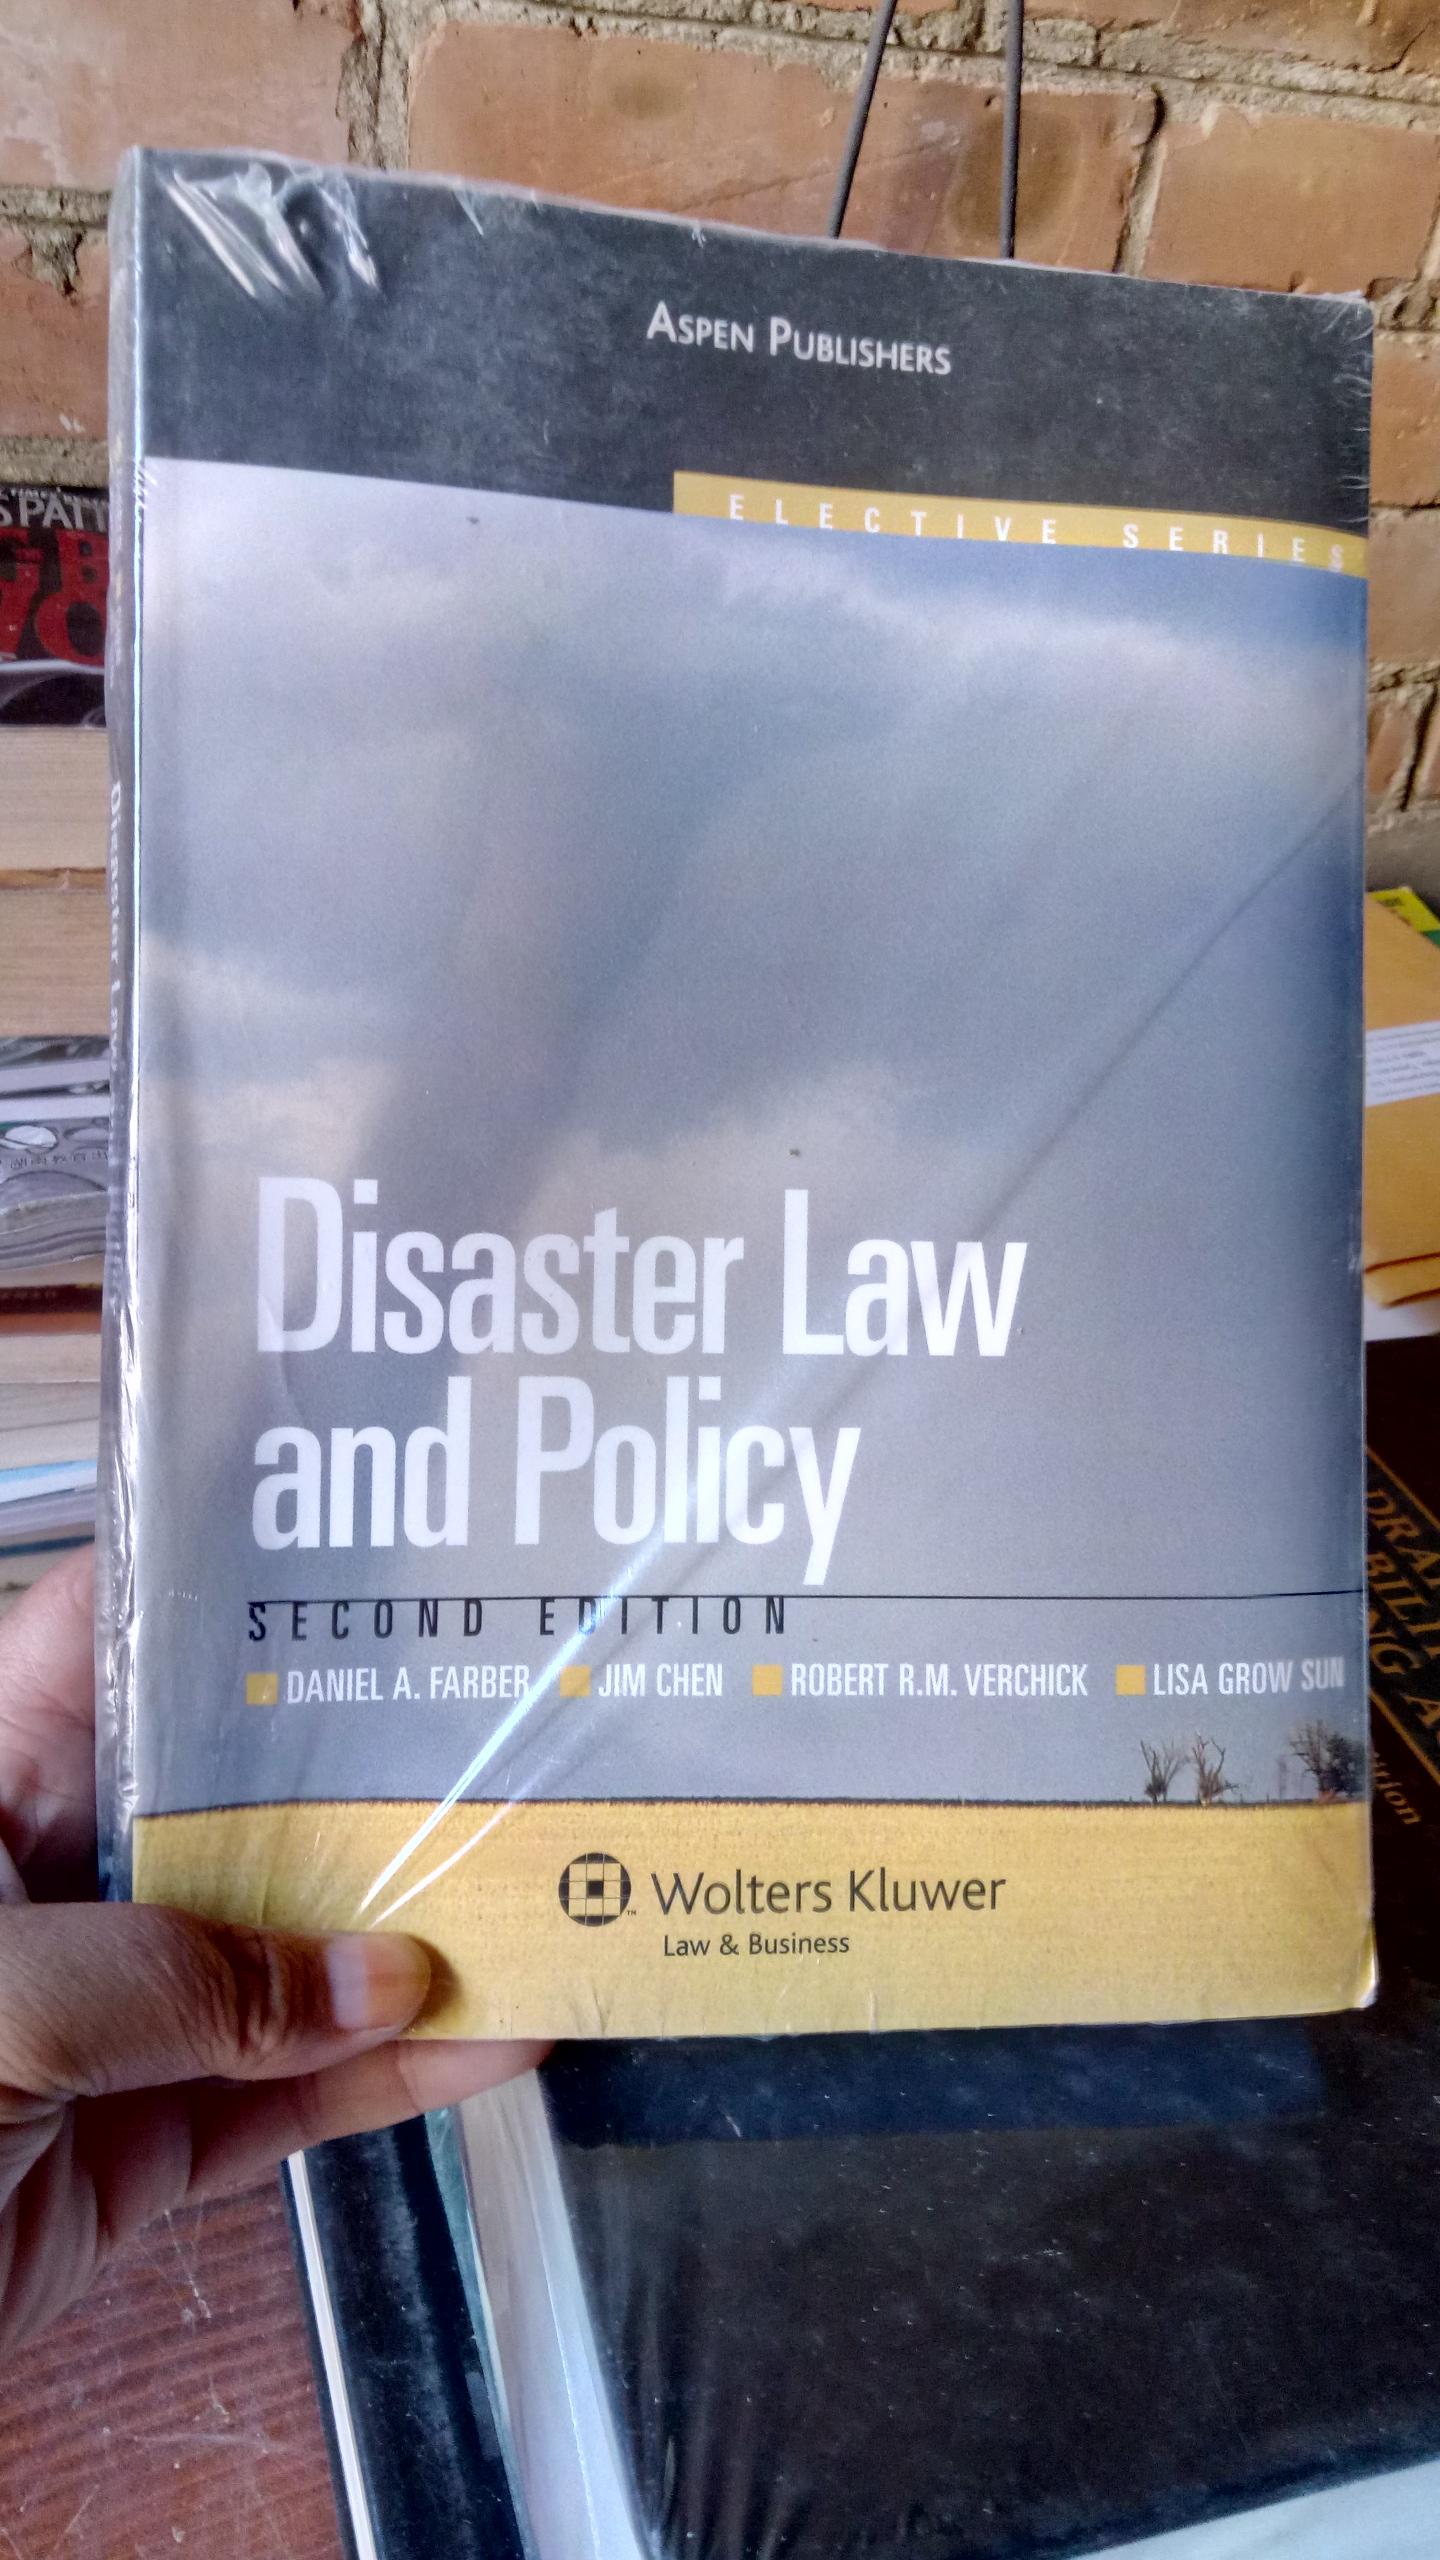 Disaster Law and Policy, Second Edition[灾难法与政策（第二版）] [平装]